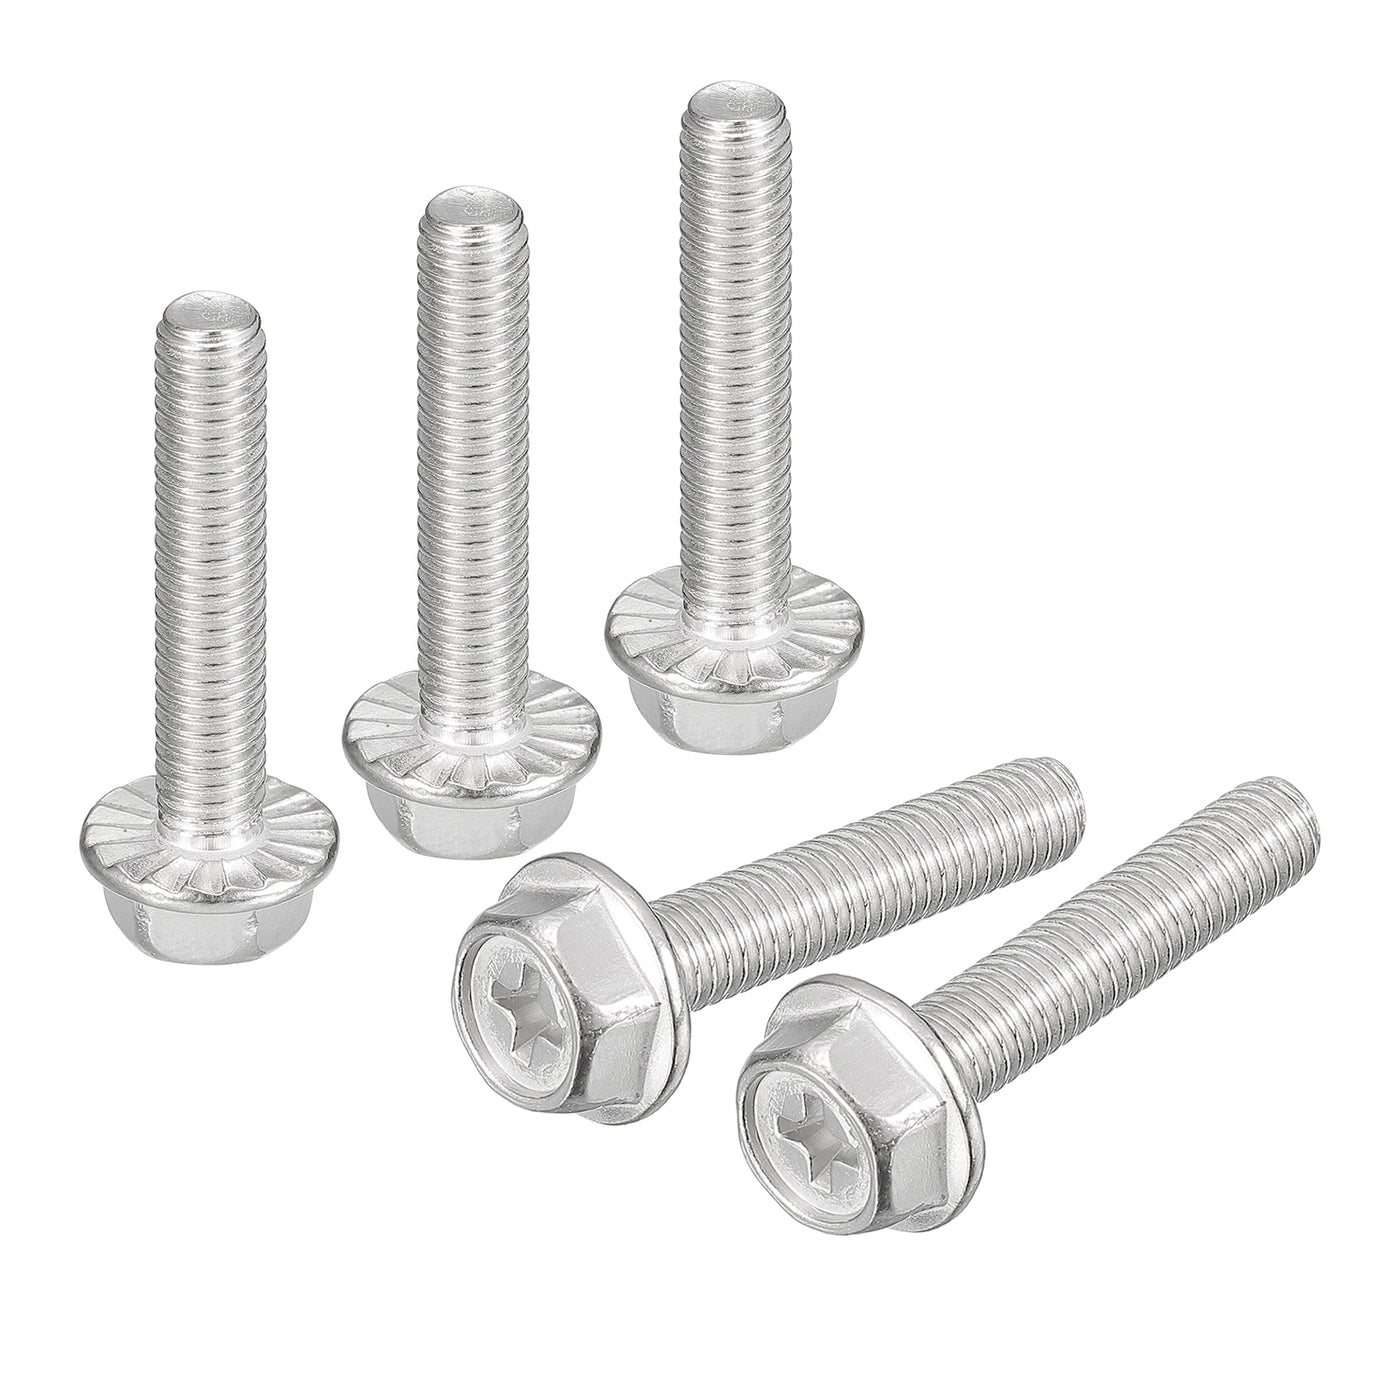 uxcell Uxcell M6x30mm Phillips Hex Head Flange Bolts, 20pcs 304 Stainless Steel Screws